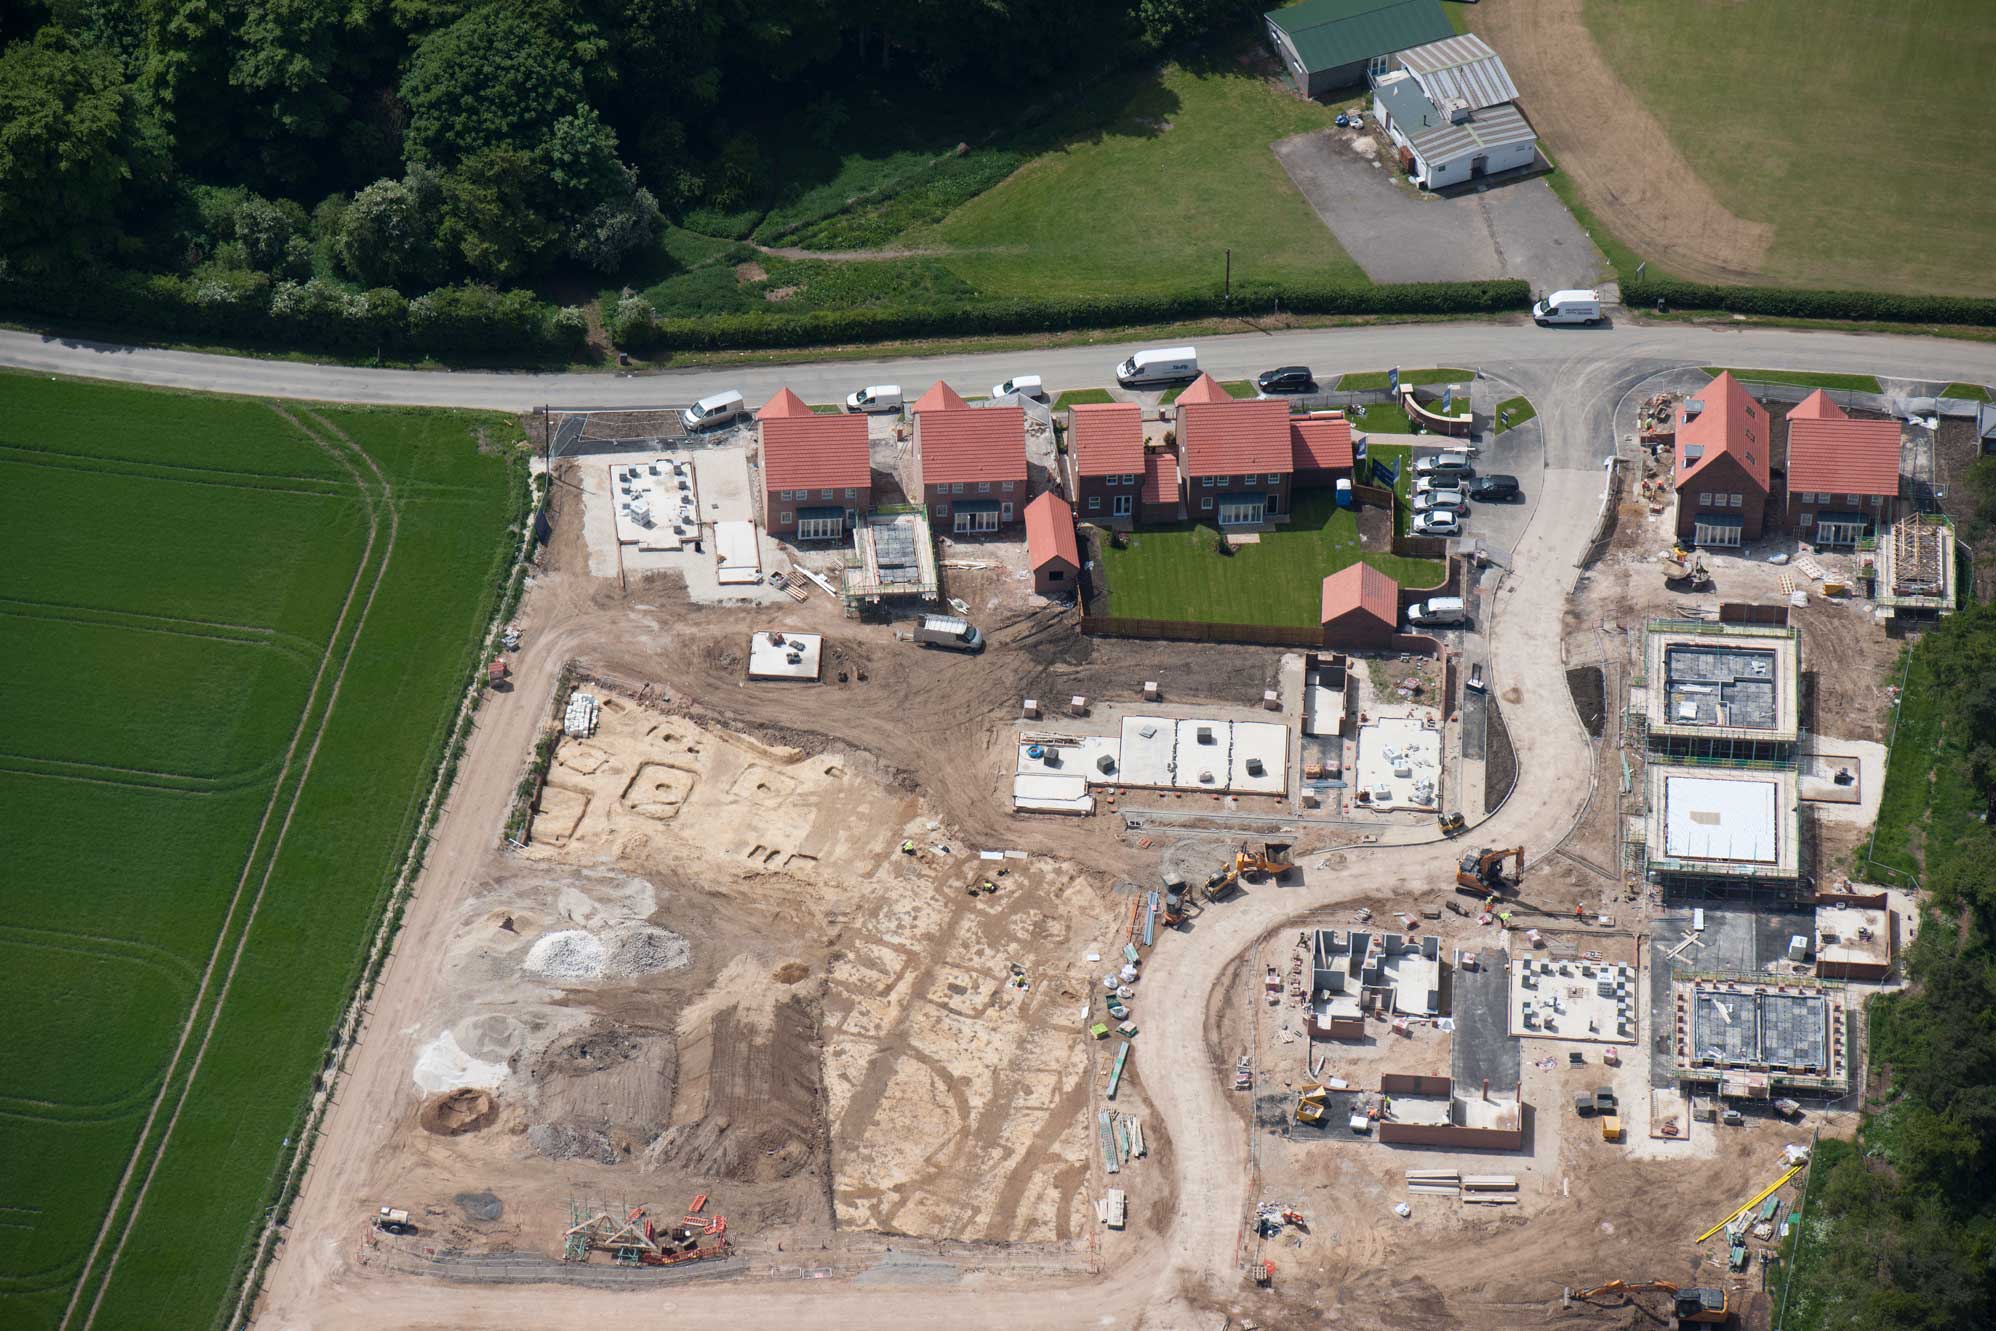 An aerial view of excavations at Pocklington in the East Riding of Yorkshire showing a number of small enclosures containing graves